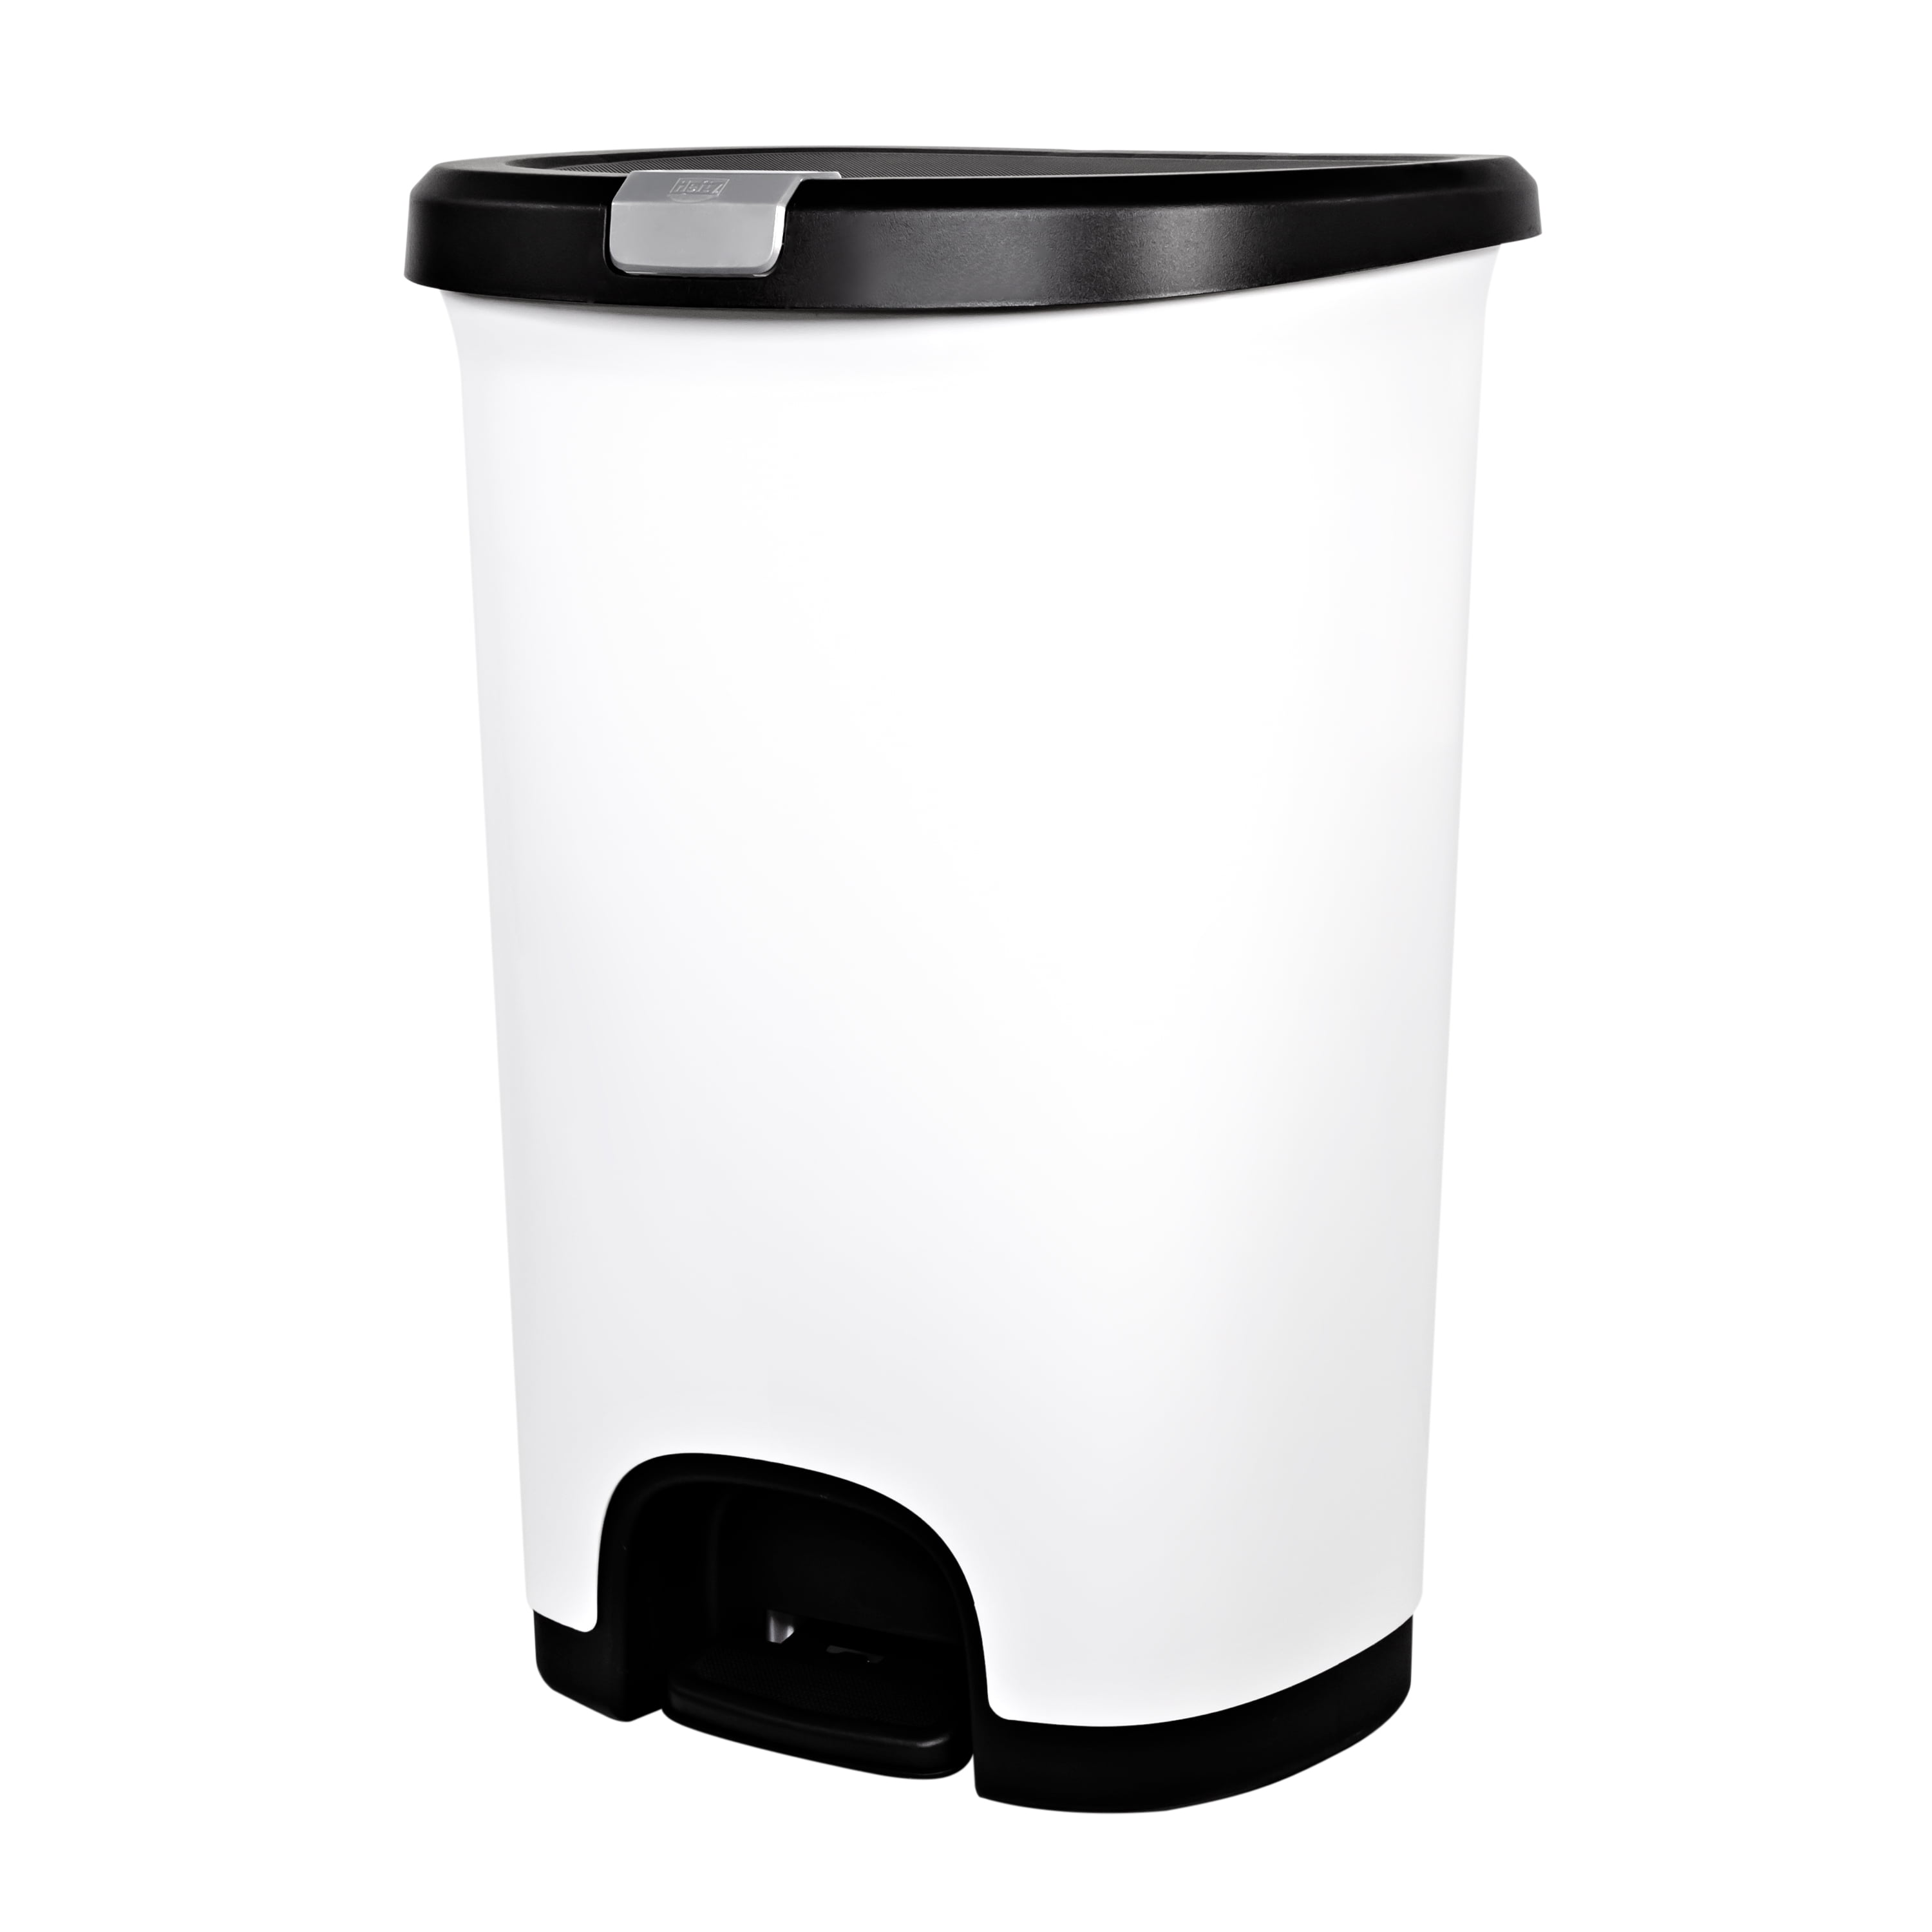 New Trash can ( Hefty 12.7 gallon) for Sale in Rancho Cucamonga